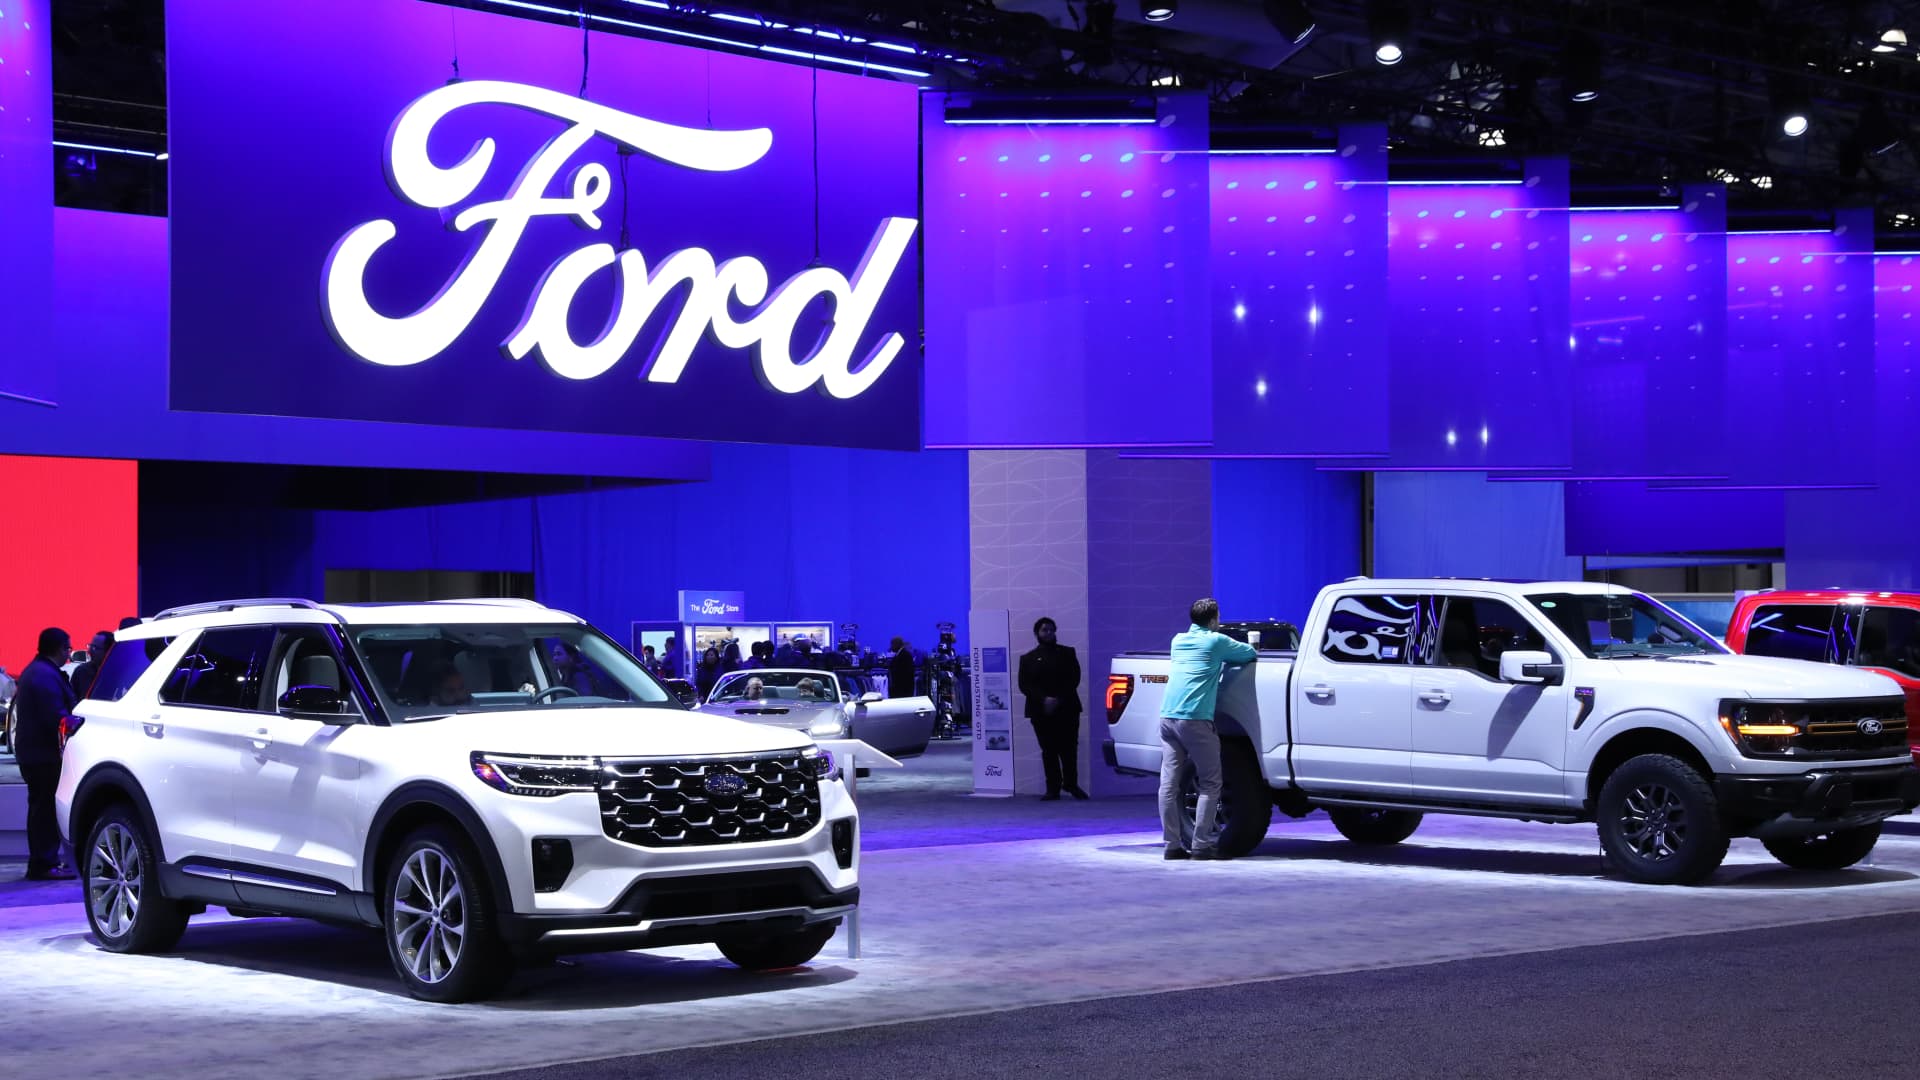 Ford is set to report earnings after the bell. Here’s what Wall Street expects